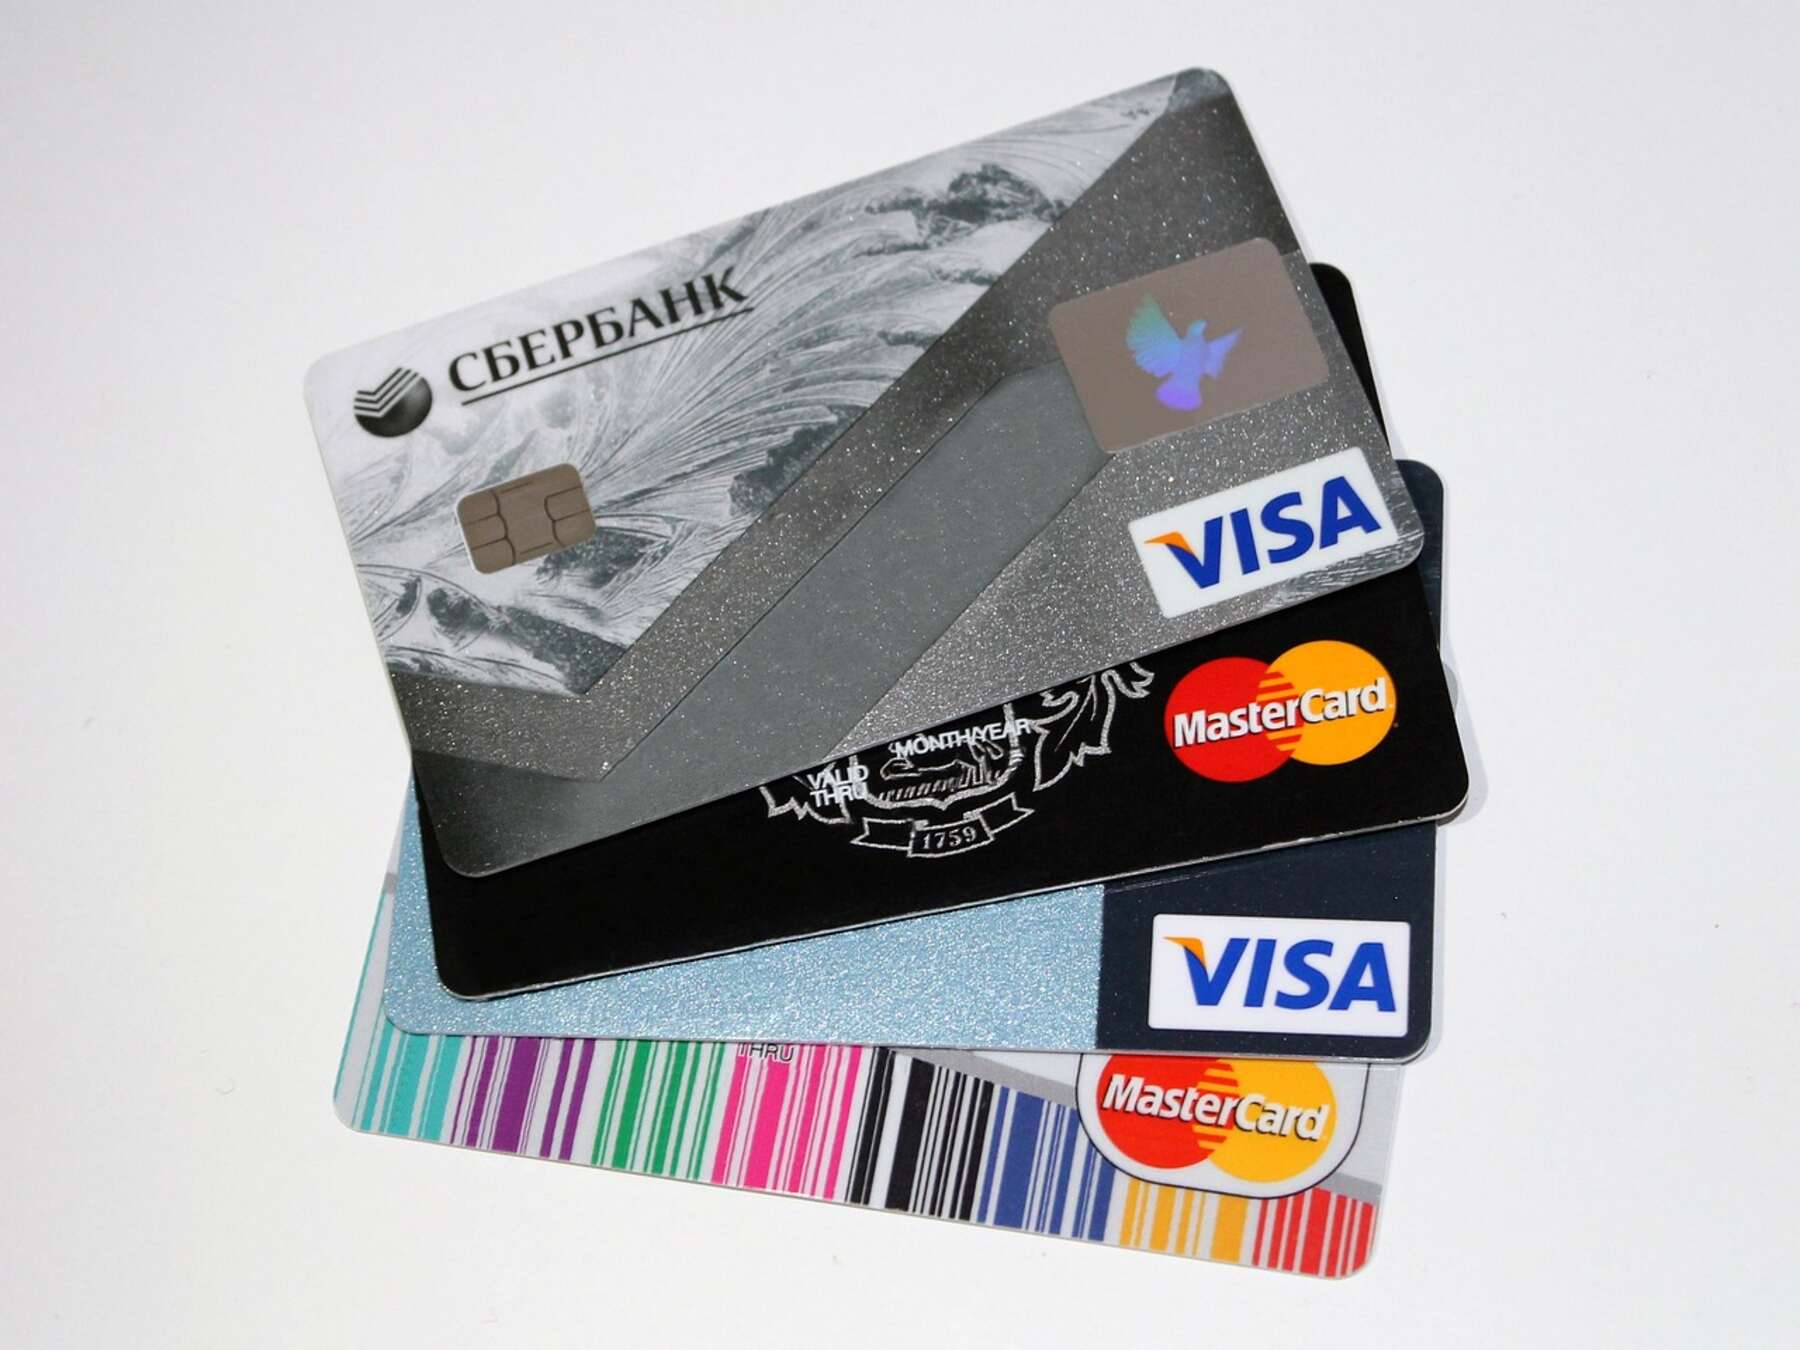 Different kinds of credit cards